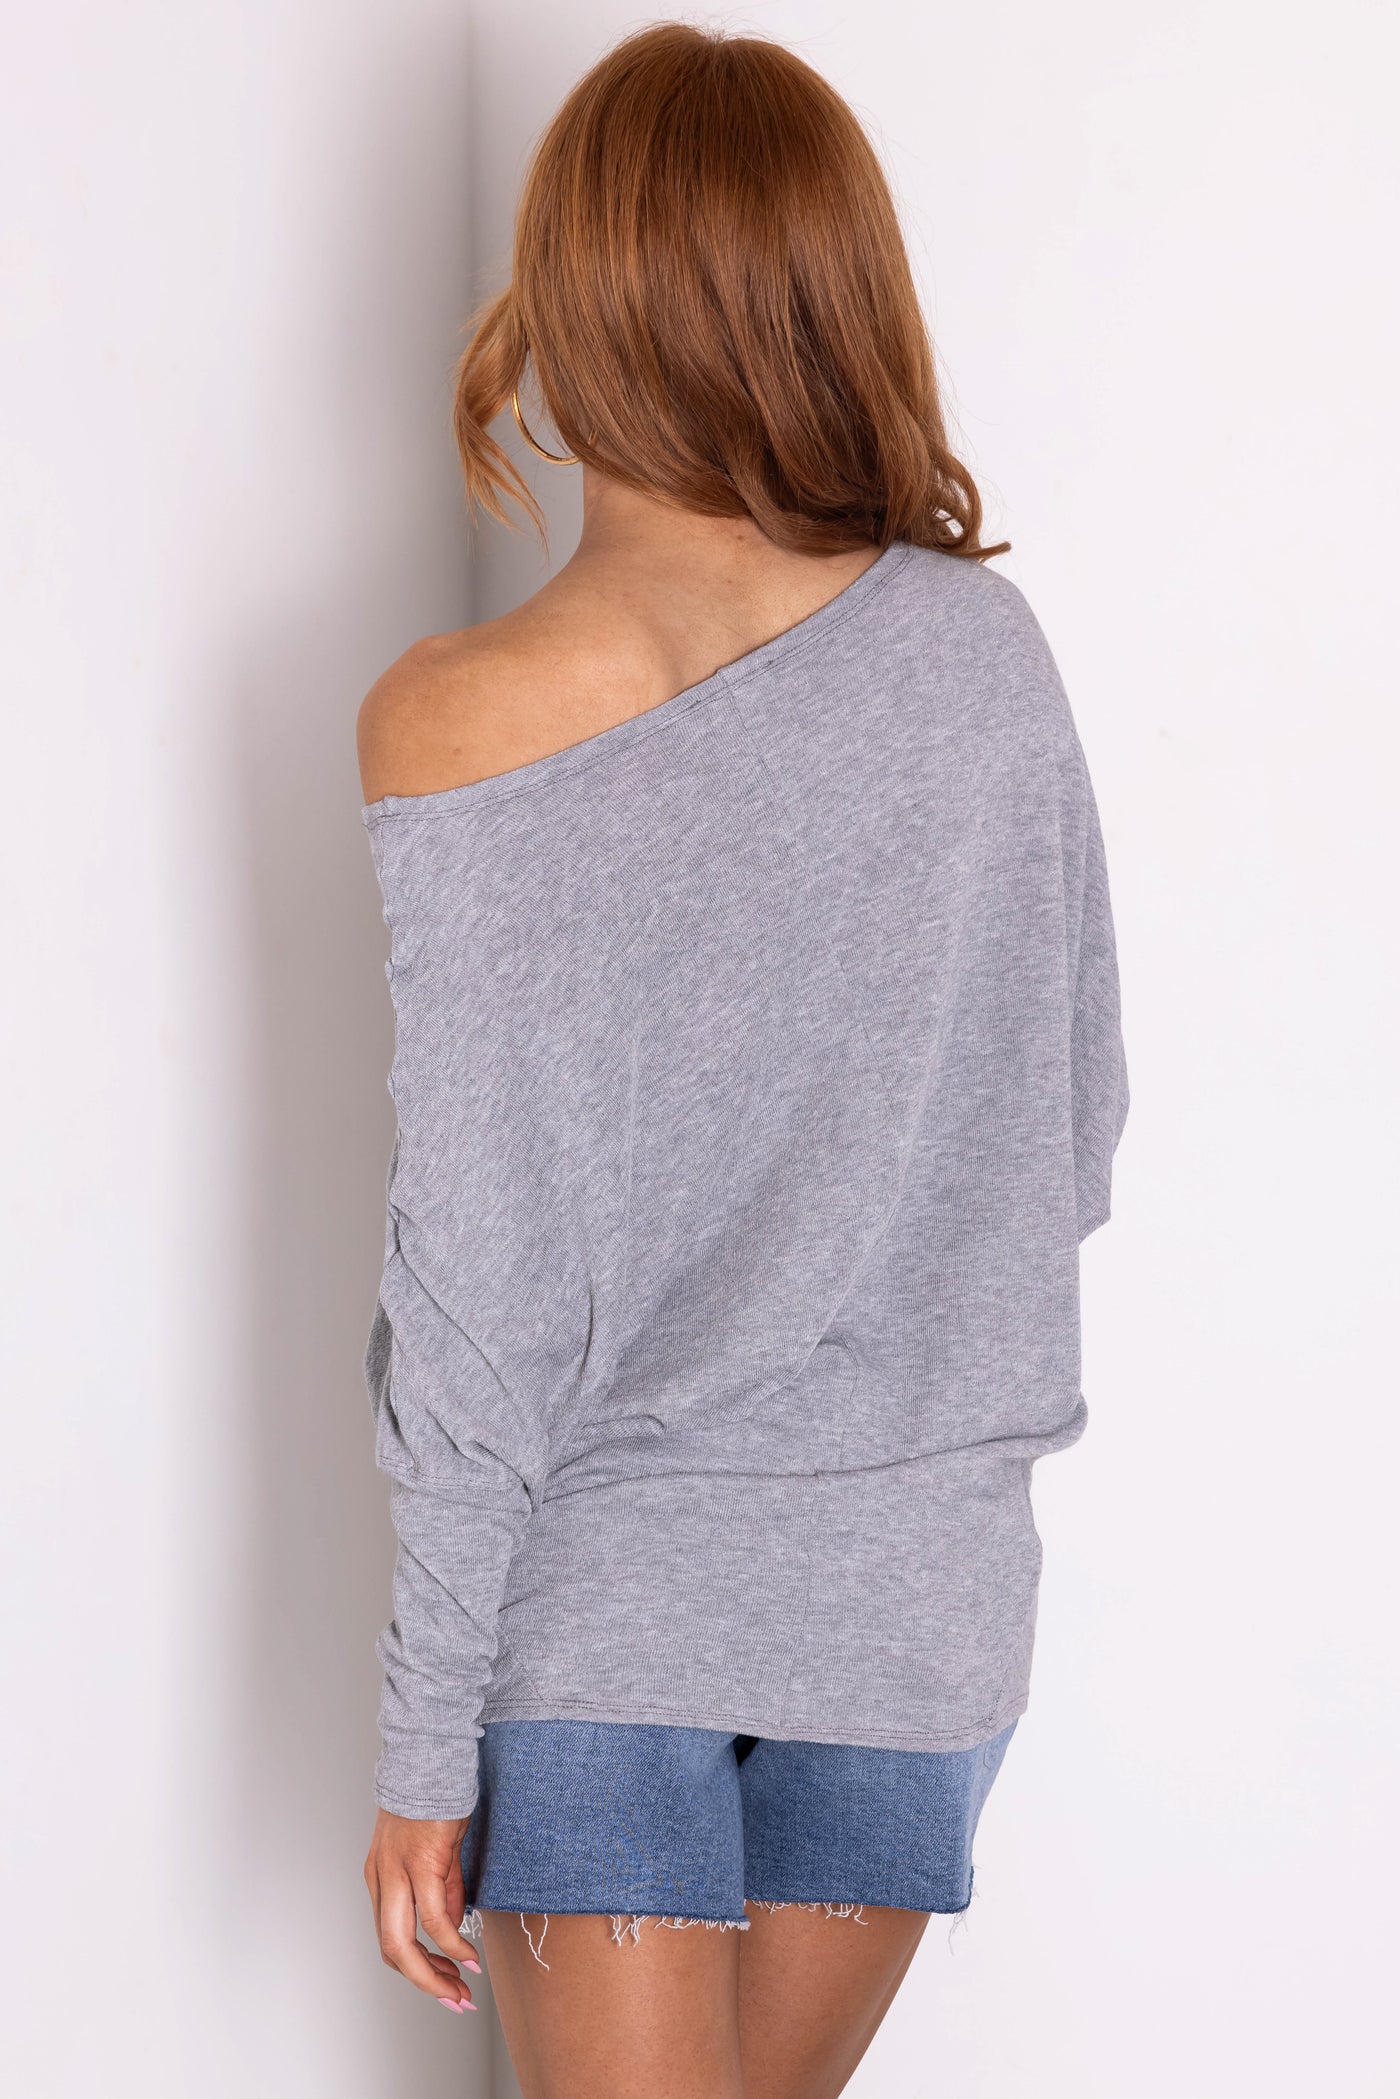 Heathered Grey Round Neck Knit Top with Long Dolman Sleeves